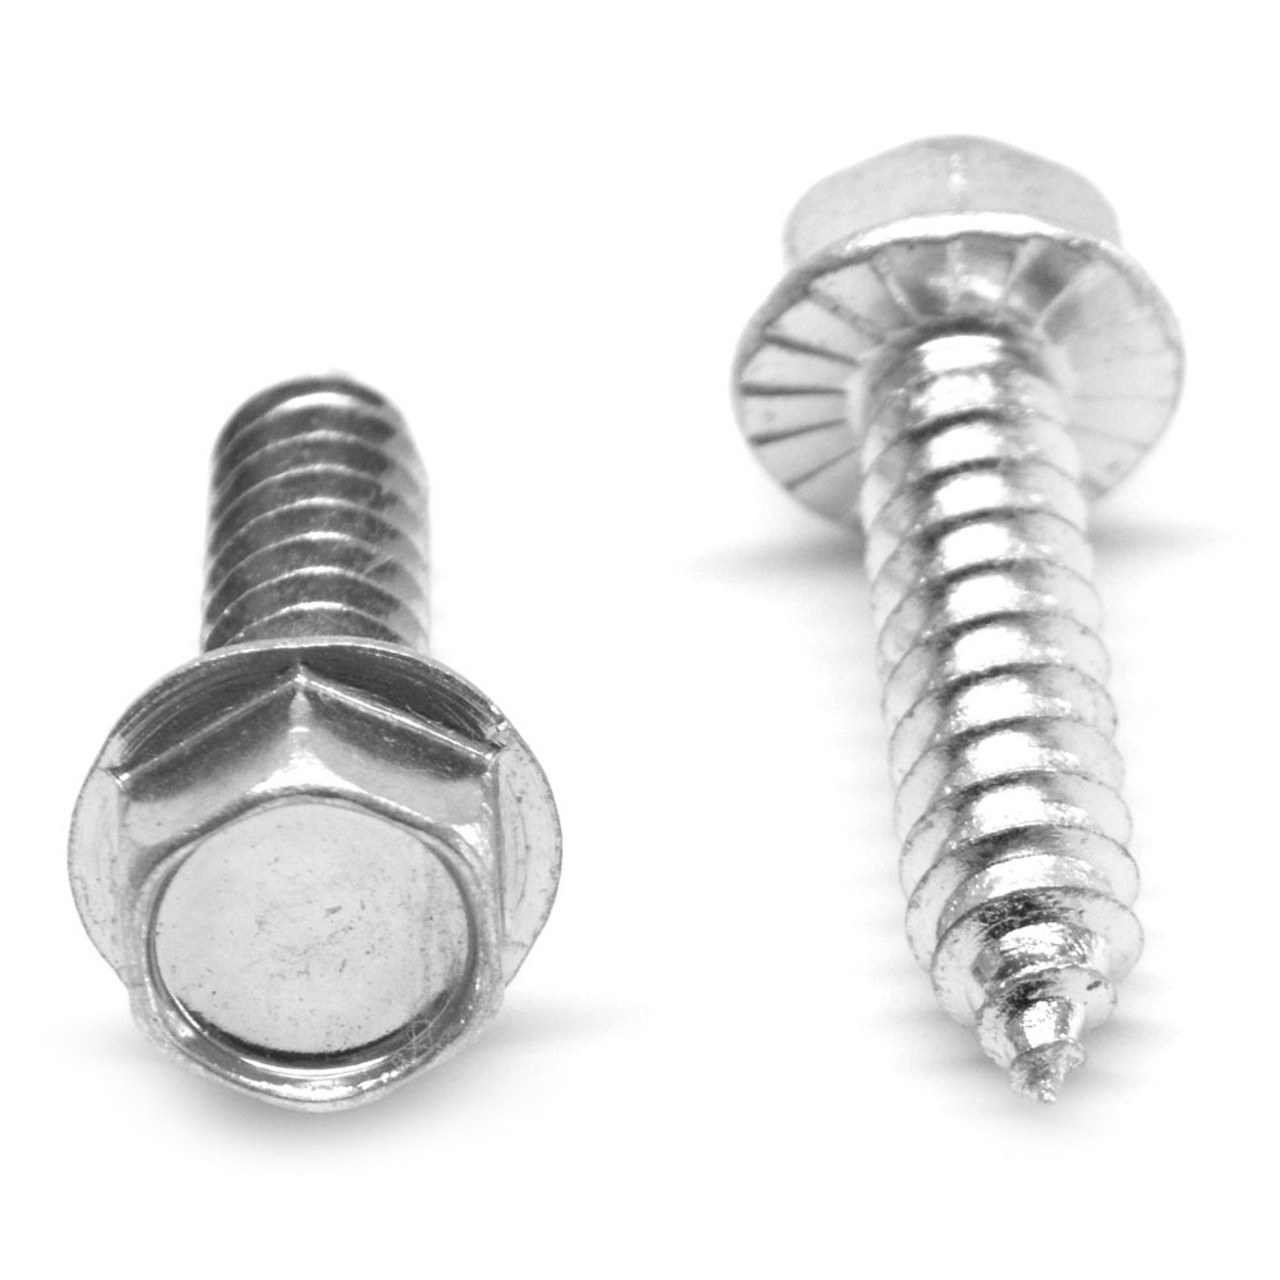 #14-10 x 3/4" (FT) 7/16" AF Sheet Metal Screw Hex Washer Head with Serration Type A Low Carbon Steel Zinc Plated